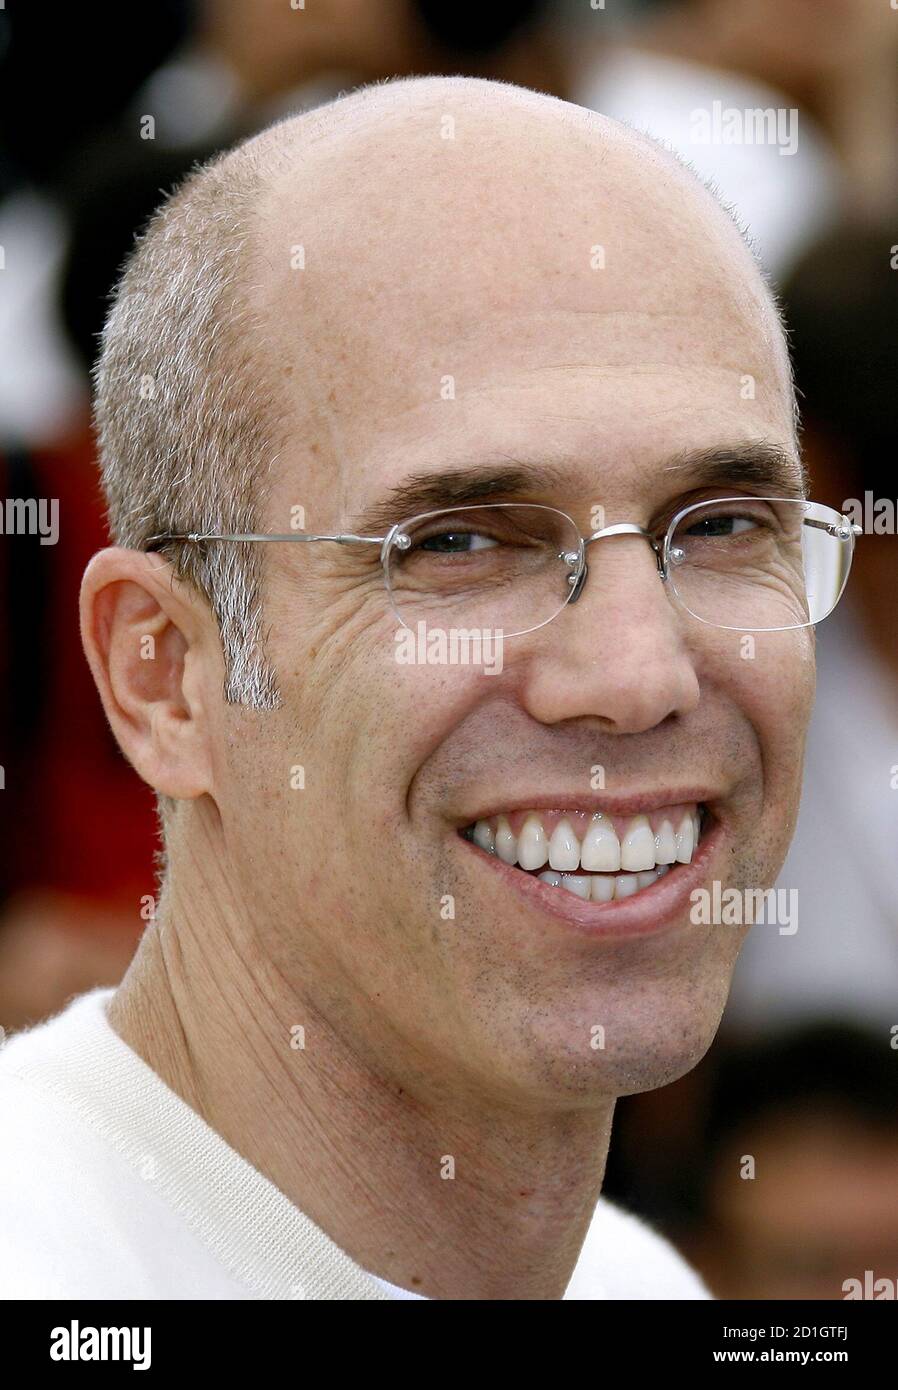 President of DreamWorks Animation Studio Jeffrey Katzenberg attends a  photocall for directors Karey Kirkpatrick and Tim Johnson's out of  competition animated film 'Over the Hedge' at the 59th Cannes Film Festival  May